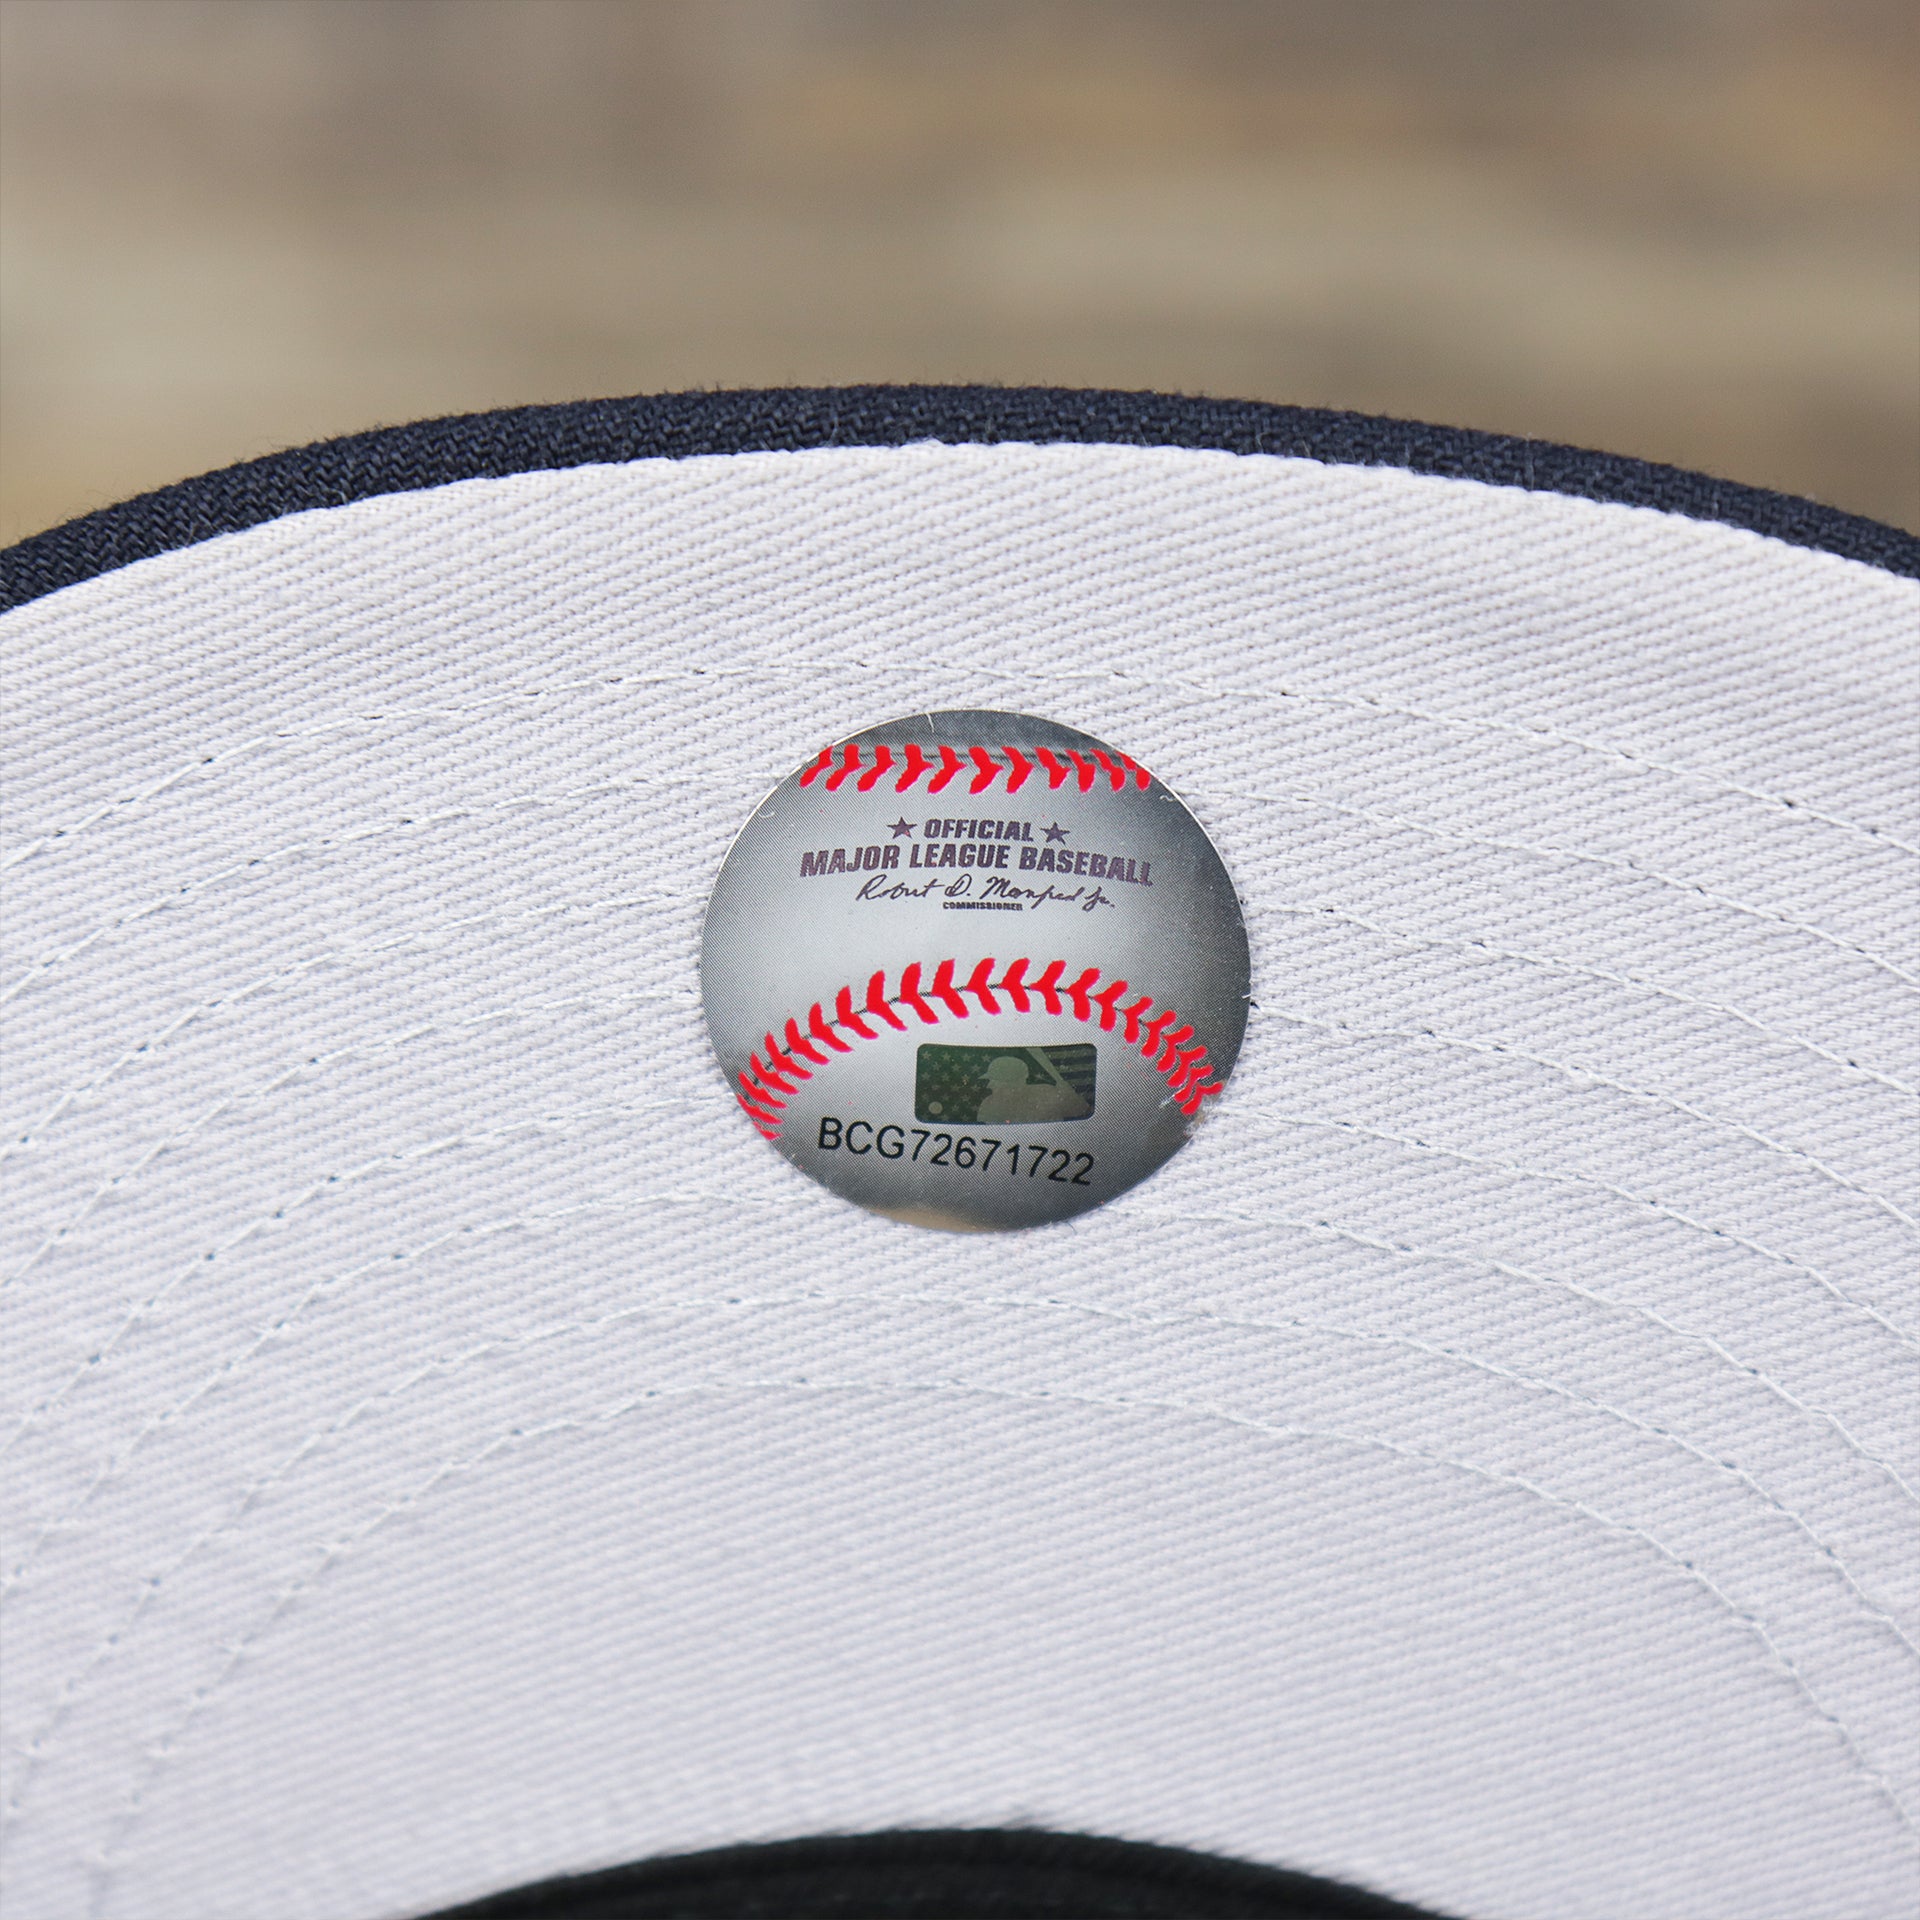 The MLB Sticker on the New York Yankees Crown Champions Gray Bottom World Championship Wins Embroidered Fitted Cap | Navy Blue 59Fifty Cap